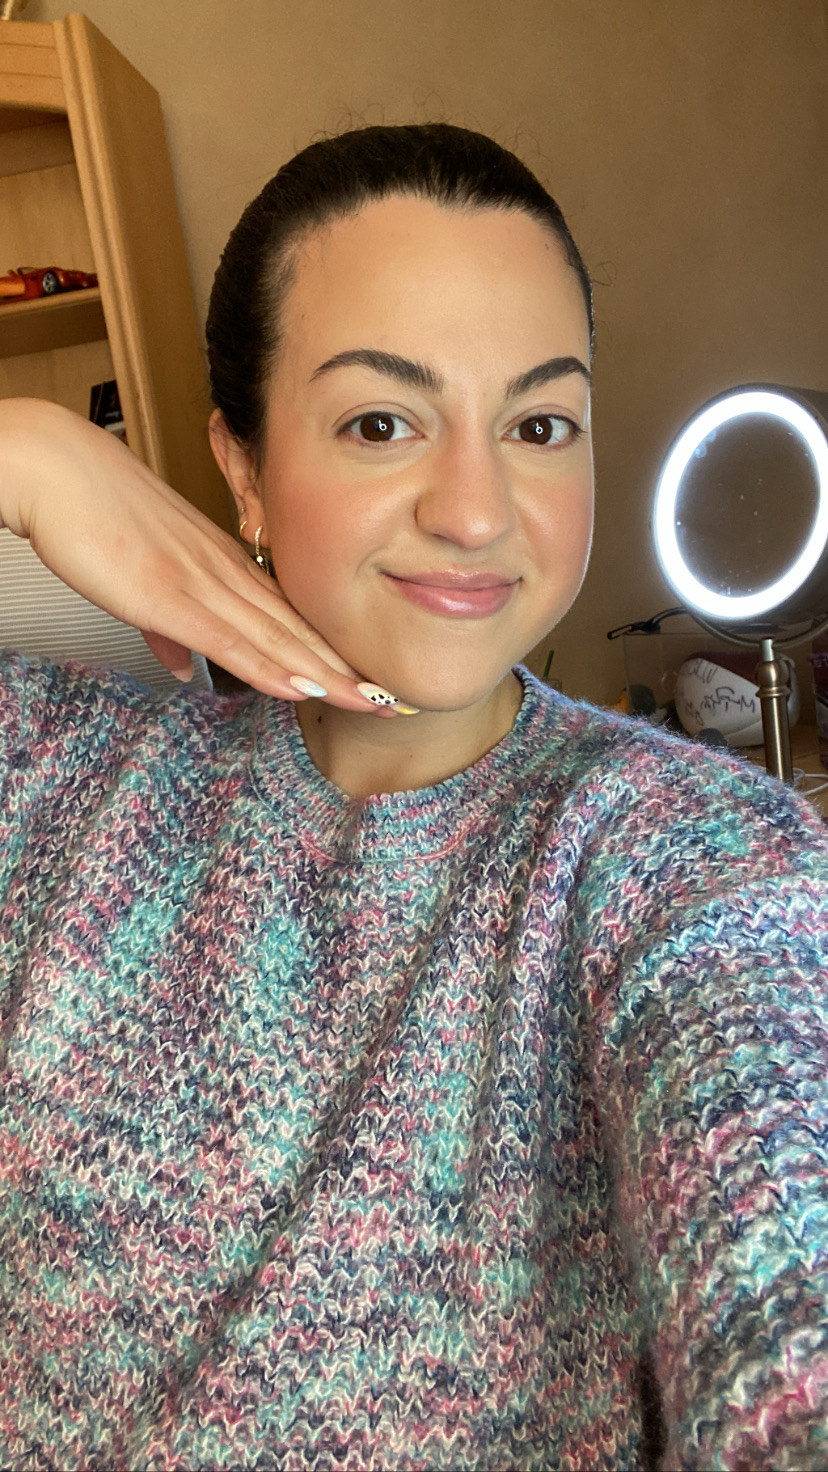 A selfie of the author wearing a sweater and her hair back showing her base makeup